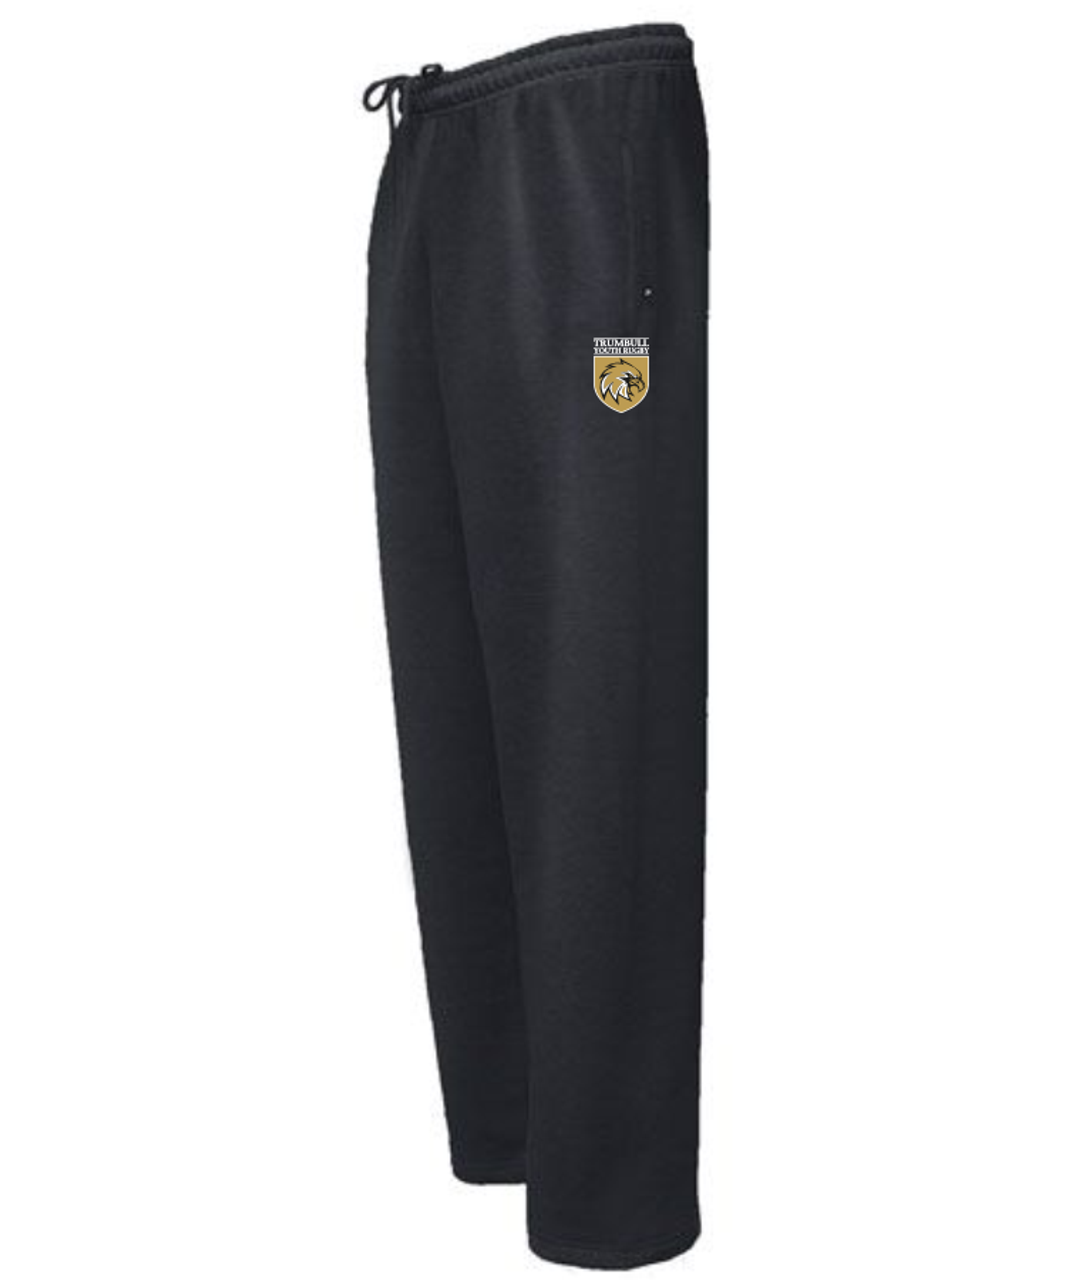 Trumbull Youth Rugby Sweatpants